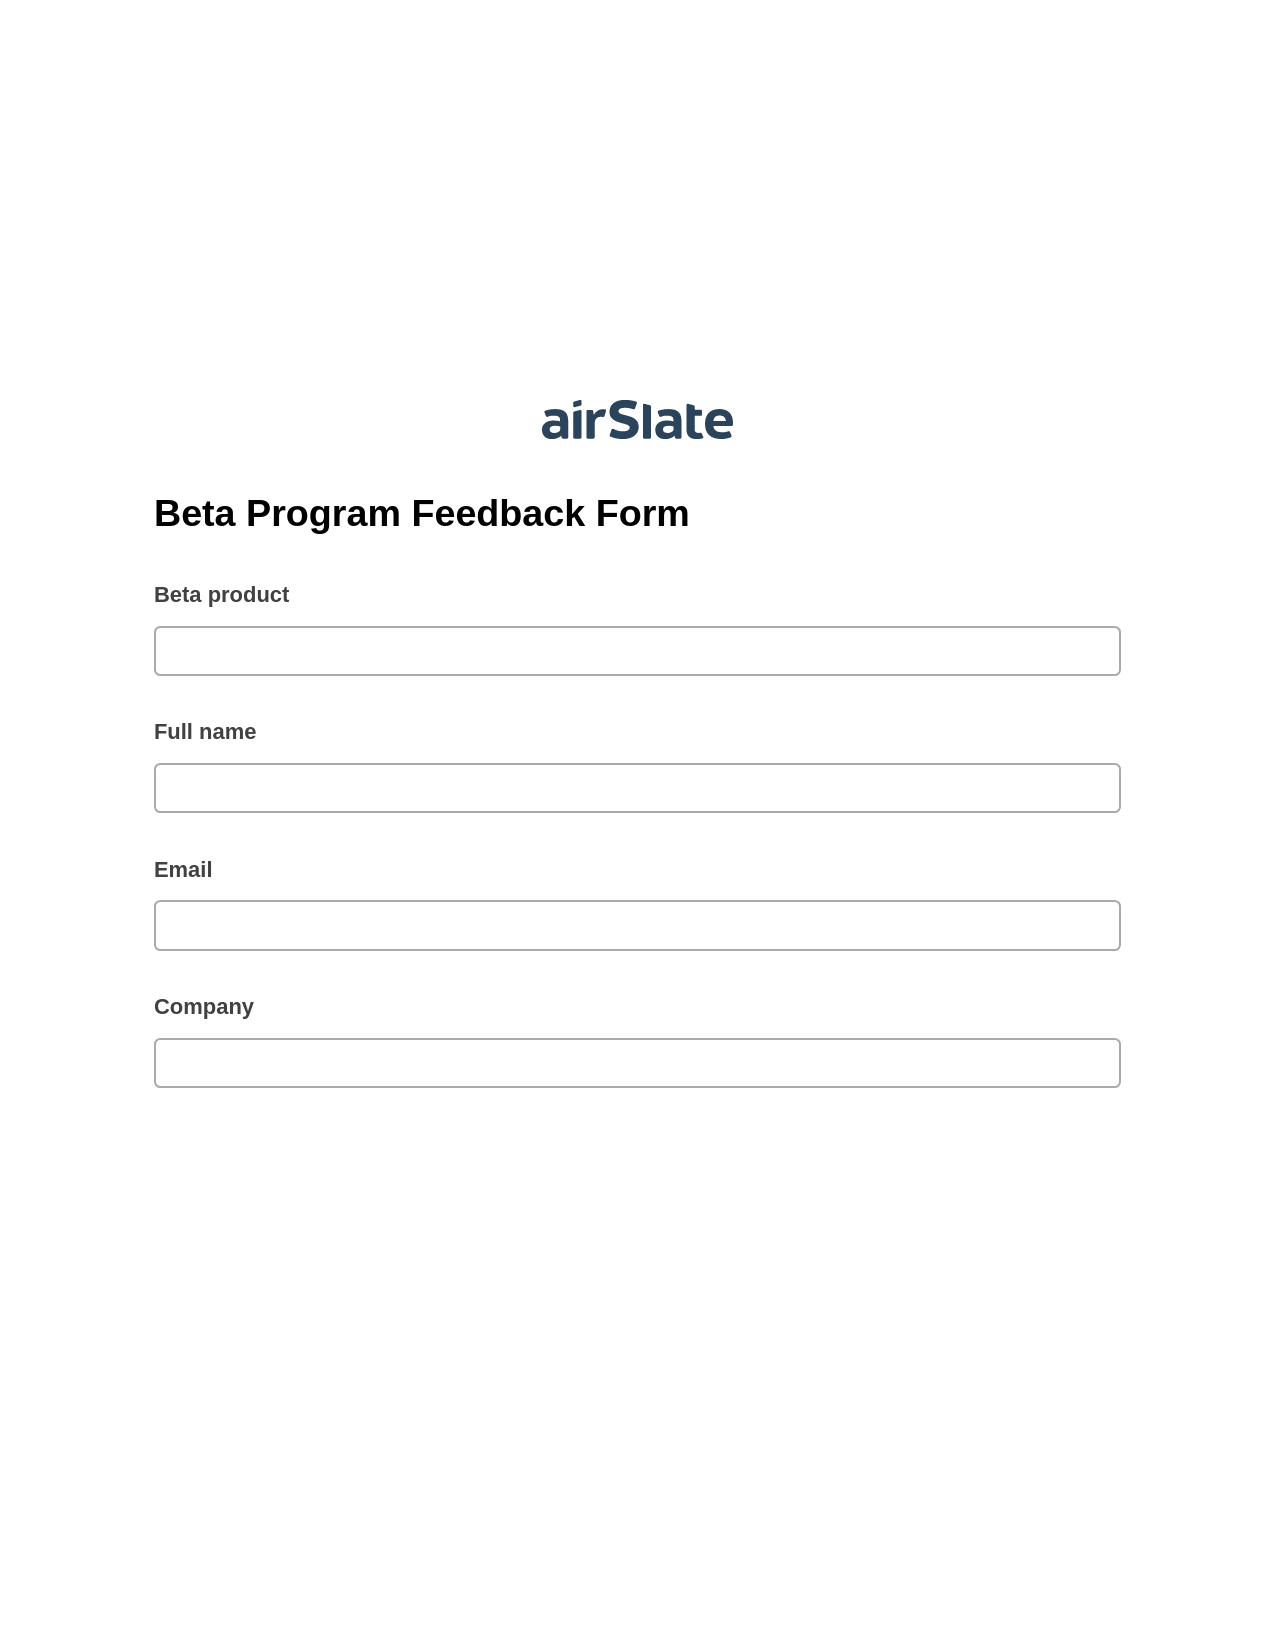 Multirole Beta Program Feedback Form Pre-fill from MySQL Bot, System Bot - Create a Slate in another Flow, Export to Excel 365 Bot